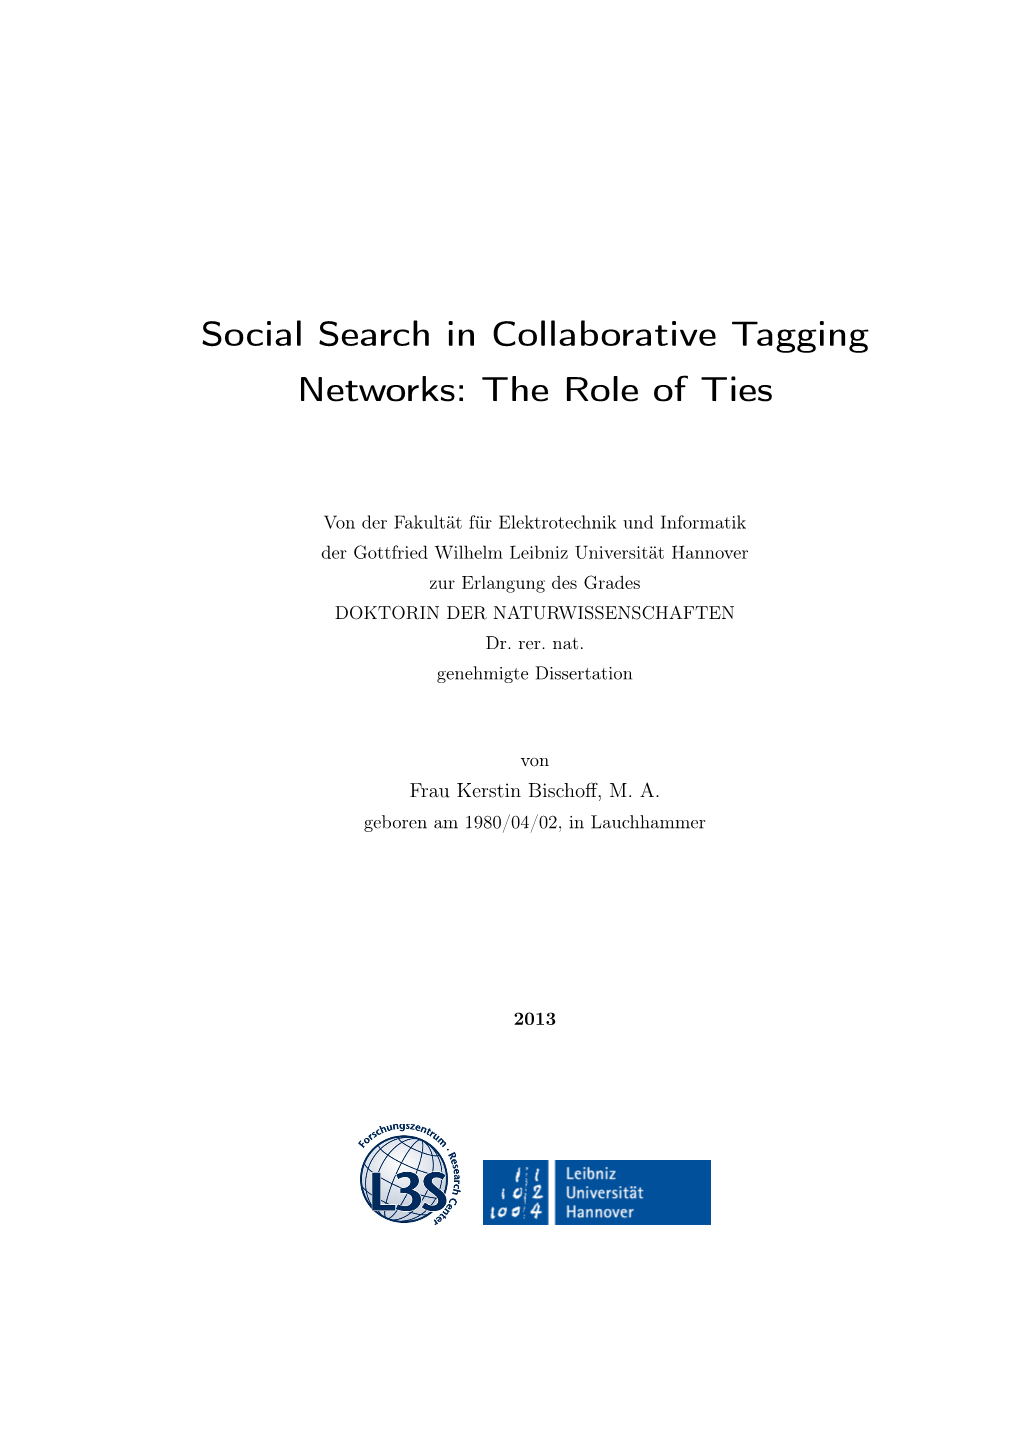 Social Search in Collaborative Tagging Networks: the Role of Ties